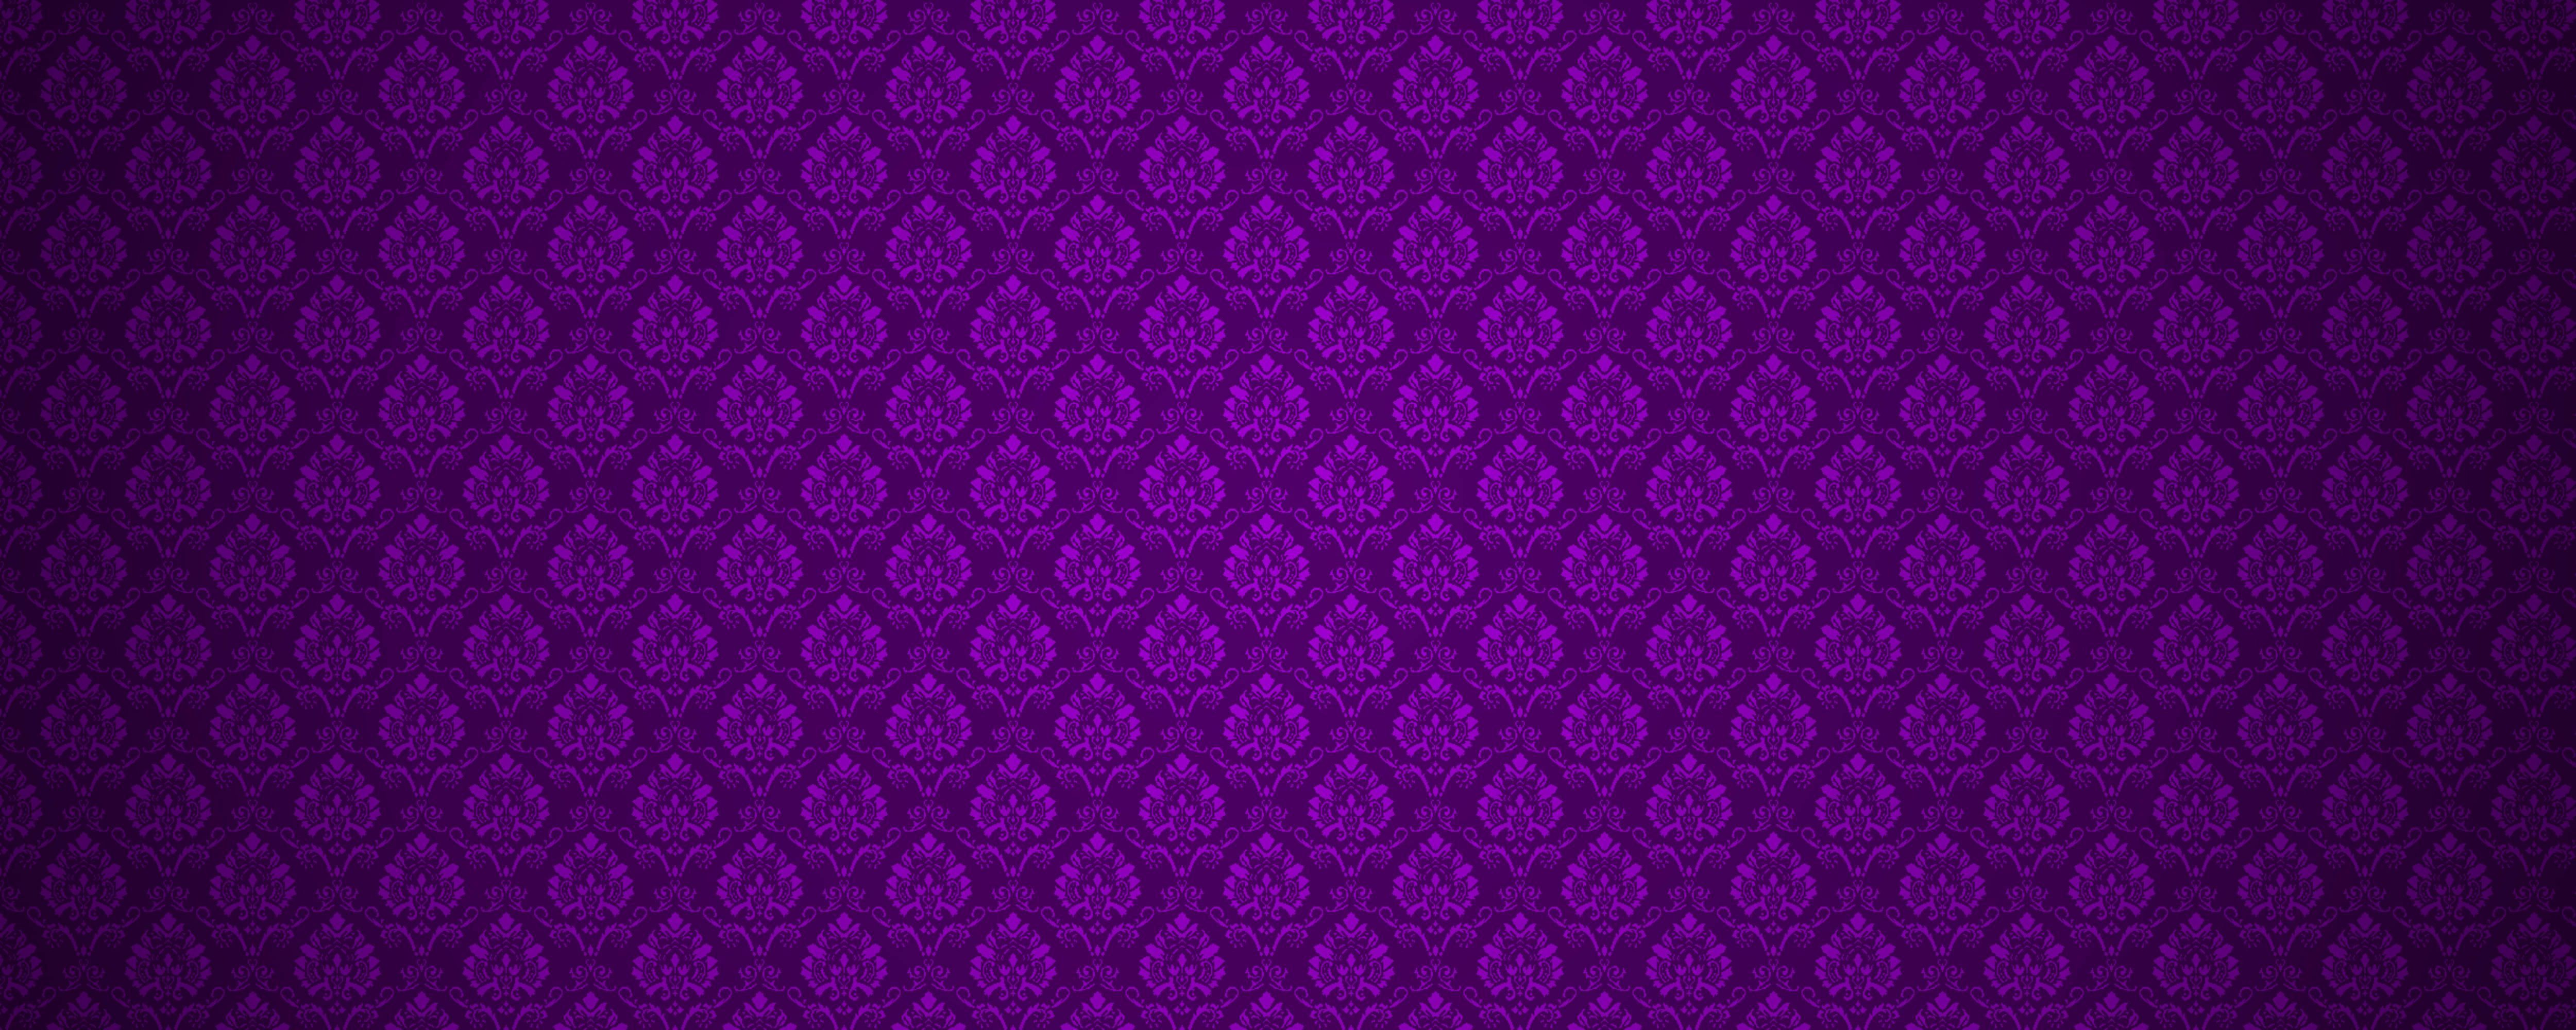 39 High Definition Purple Wallpaper Images for Free Download